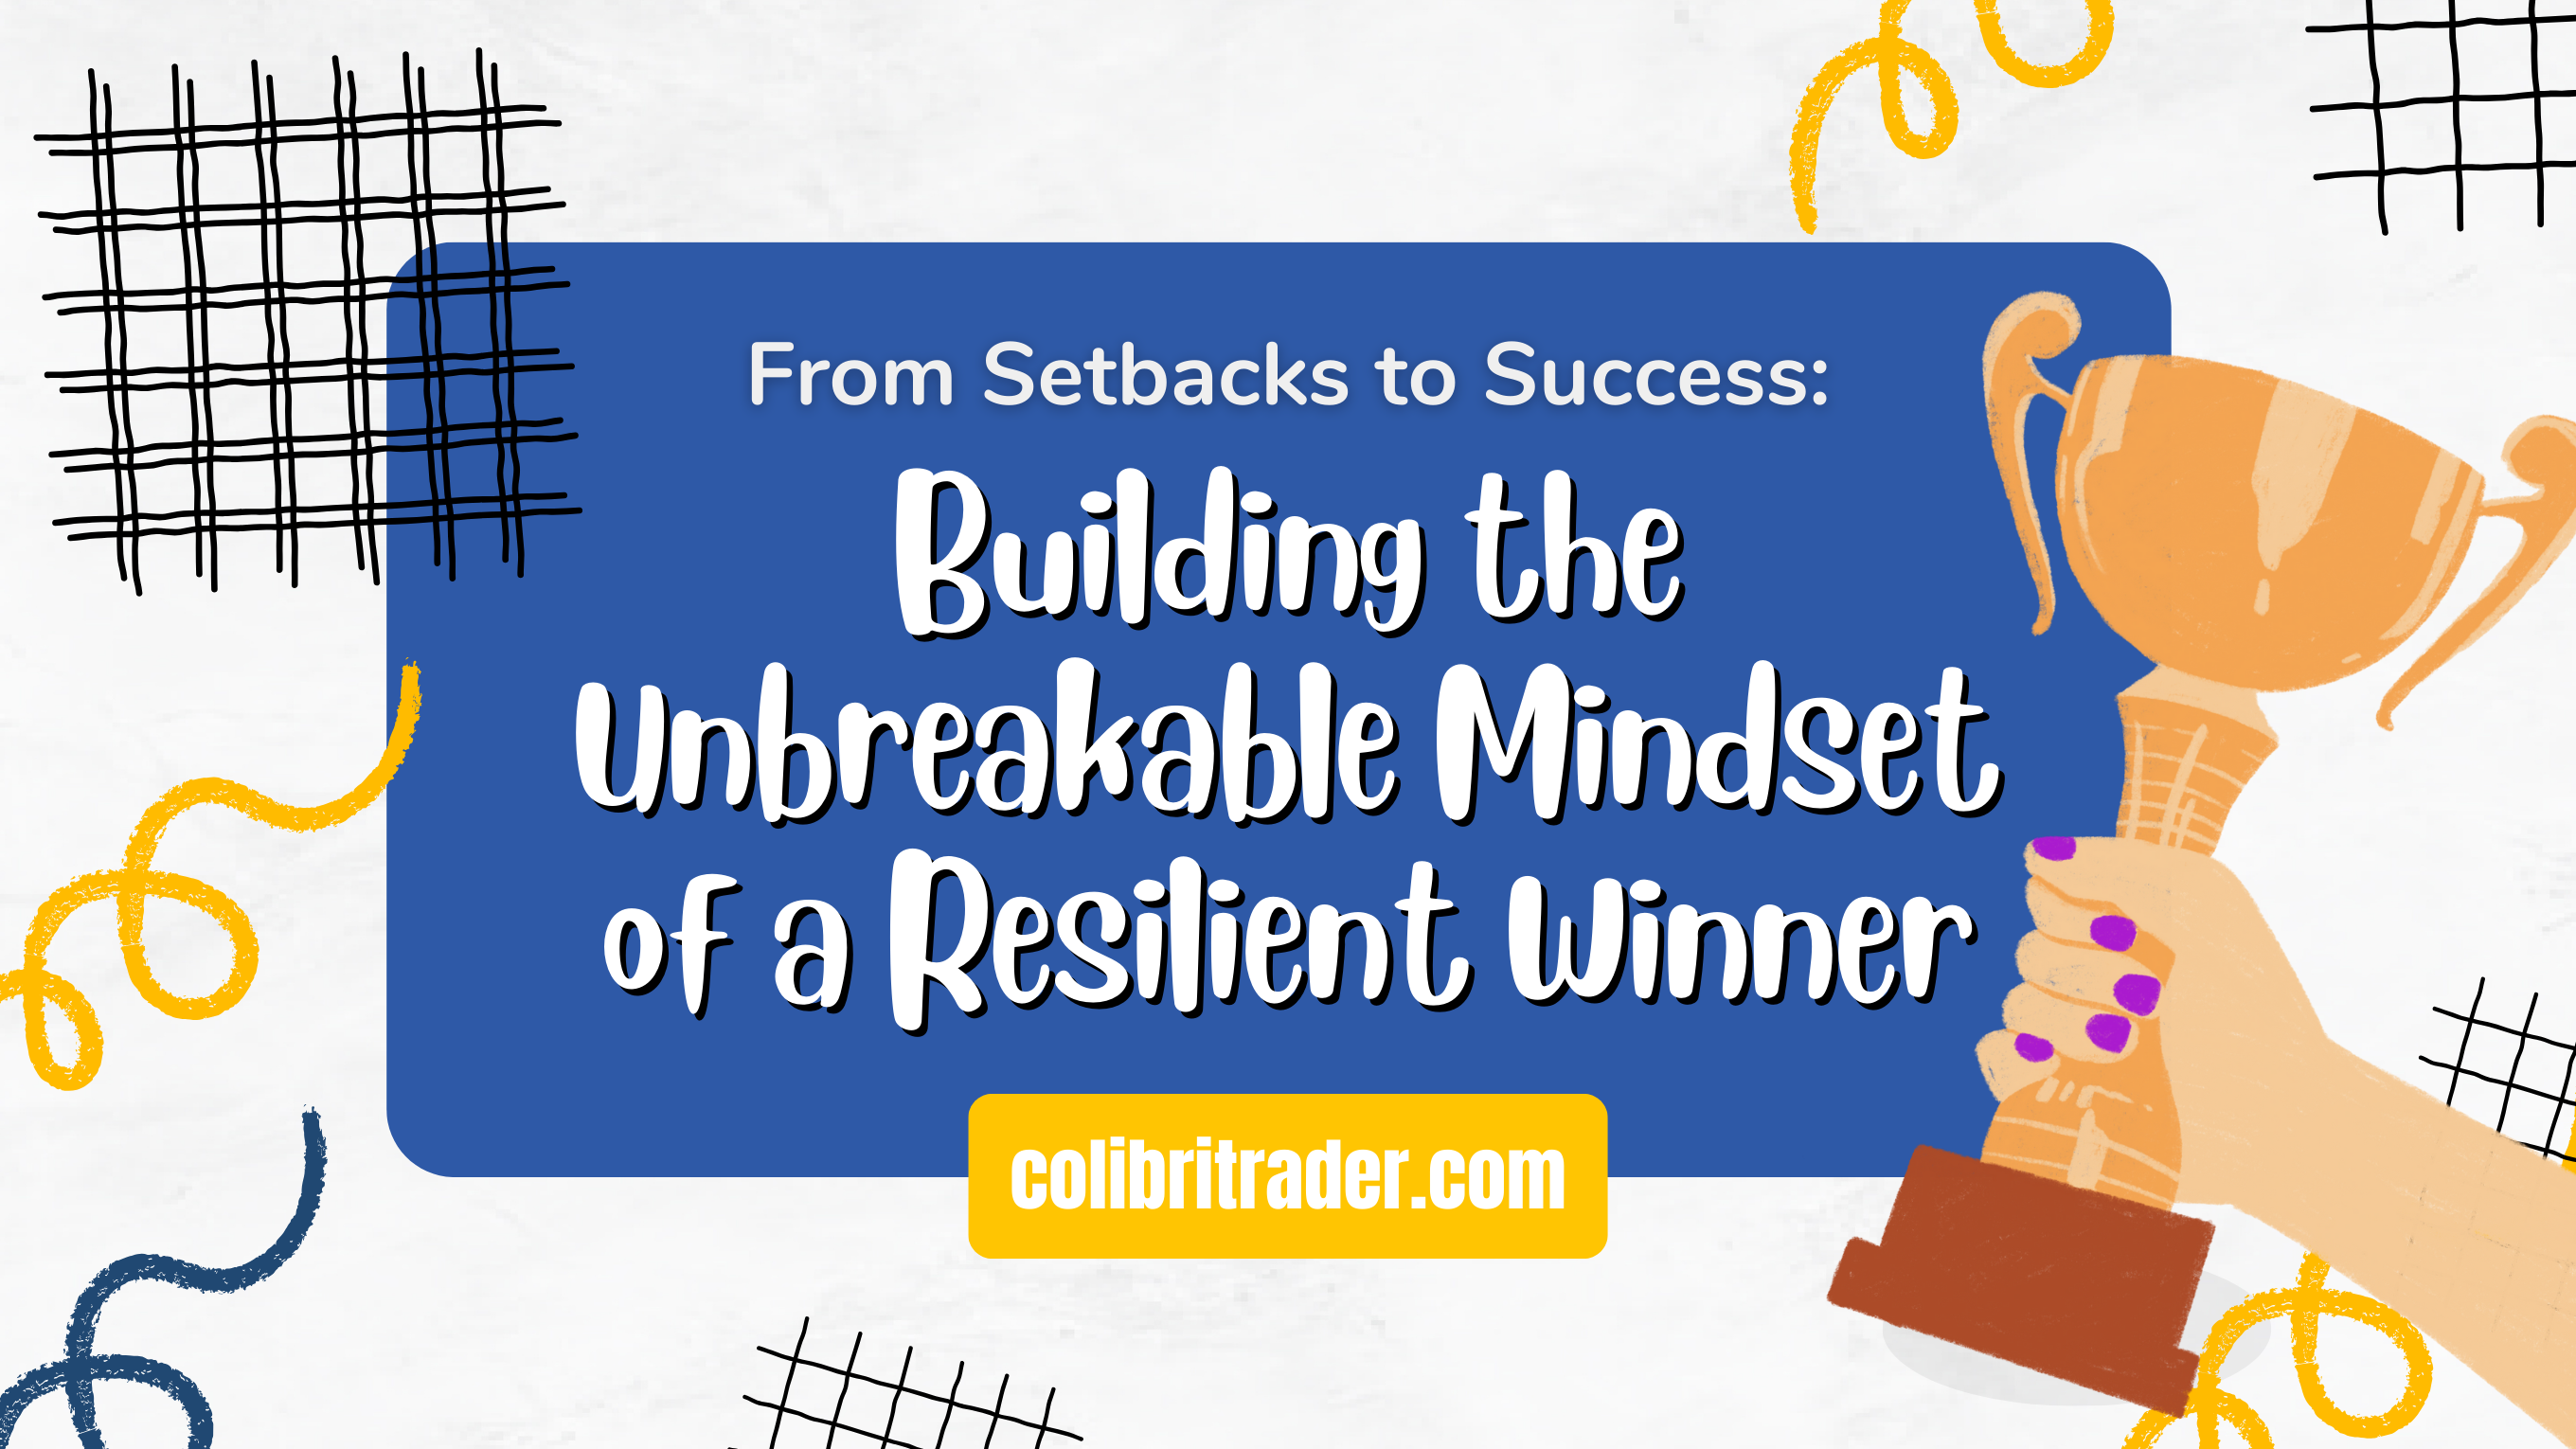 From Setbacks to Success: Building the Unbreakable Mindset of a Resilient Winner